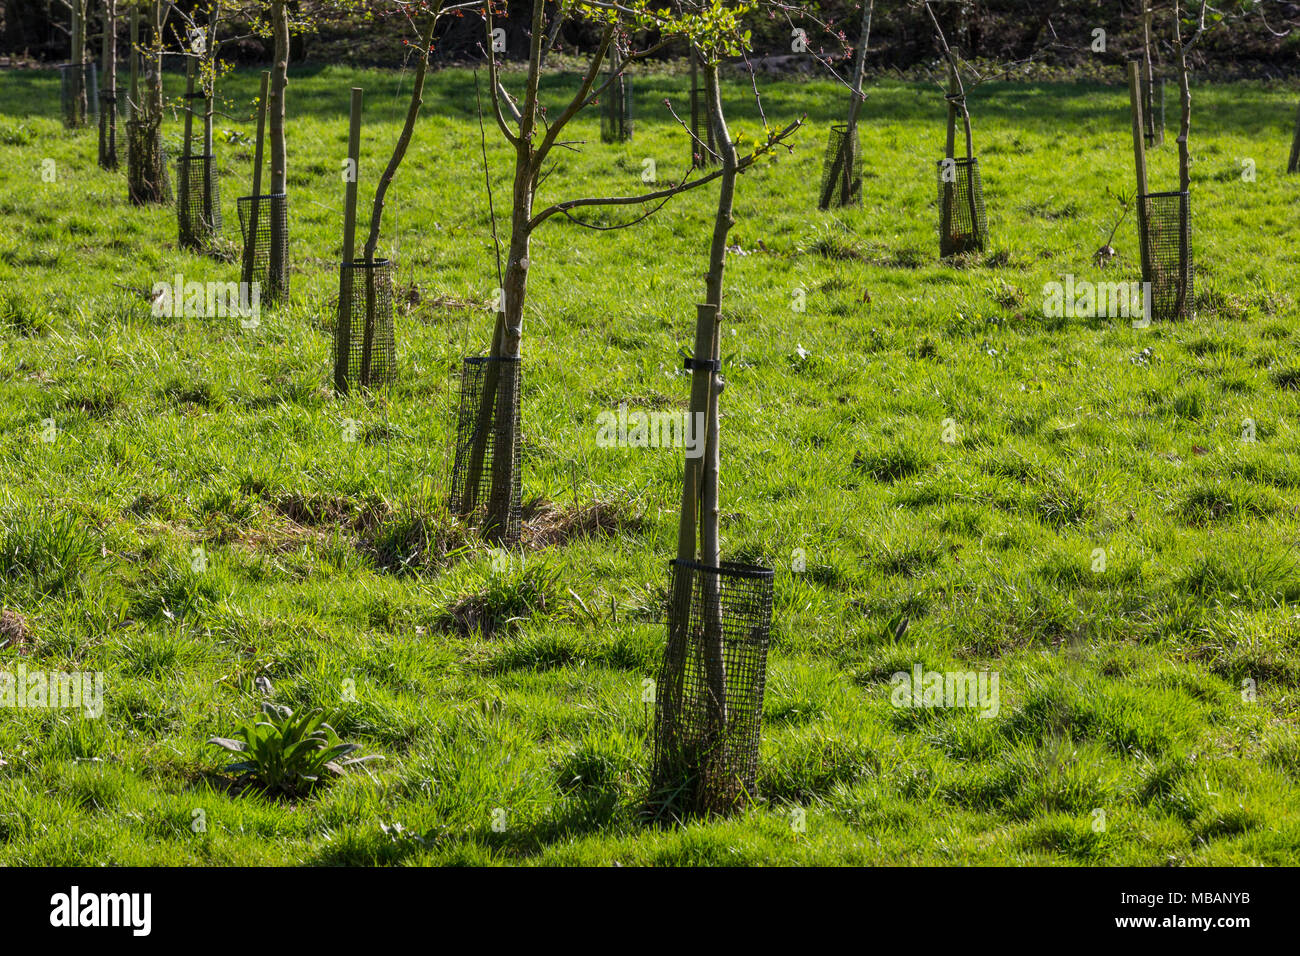 Rabbit guards on young trees in an orchard, Suffolk, UK. Stock Photo